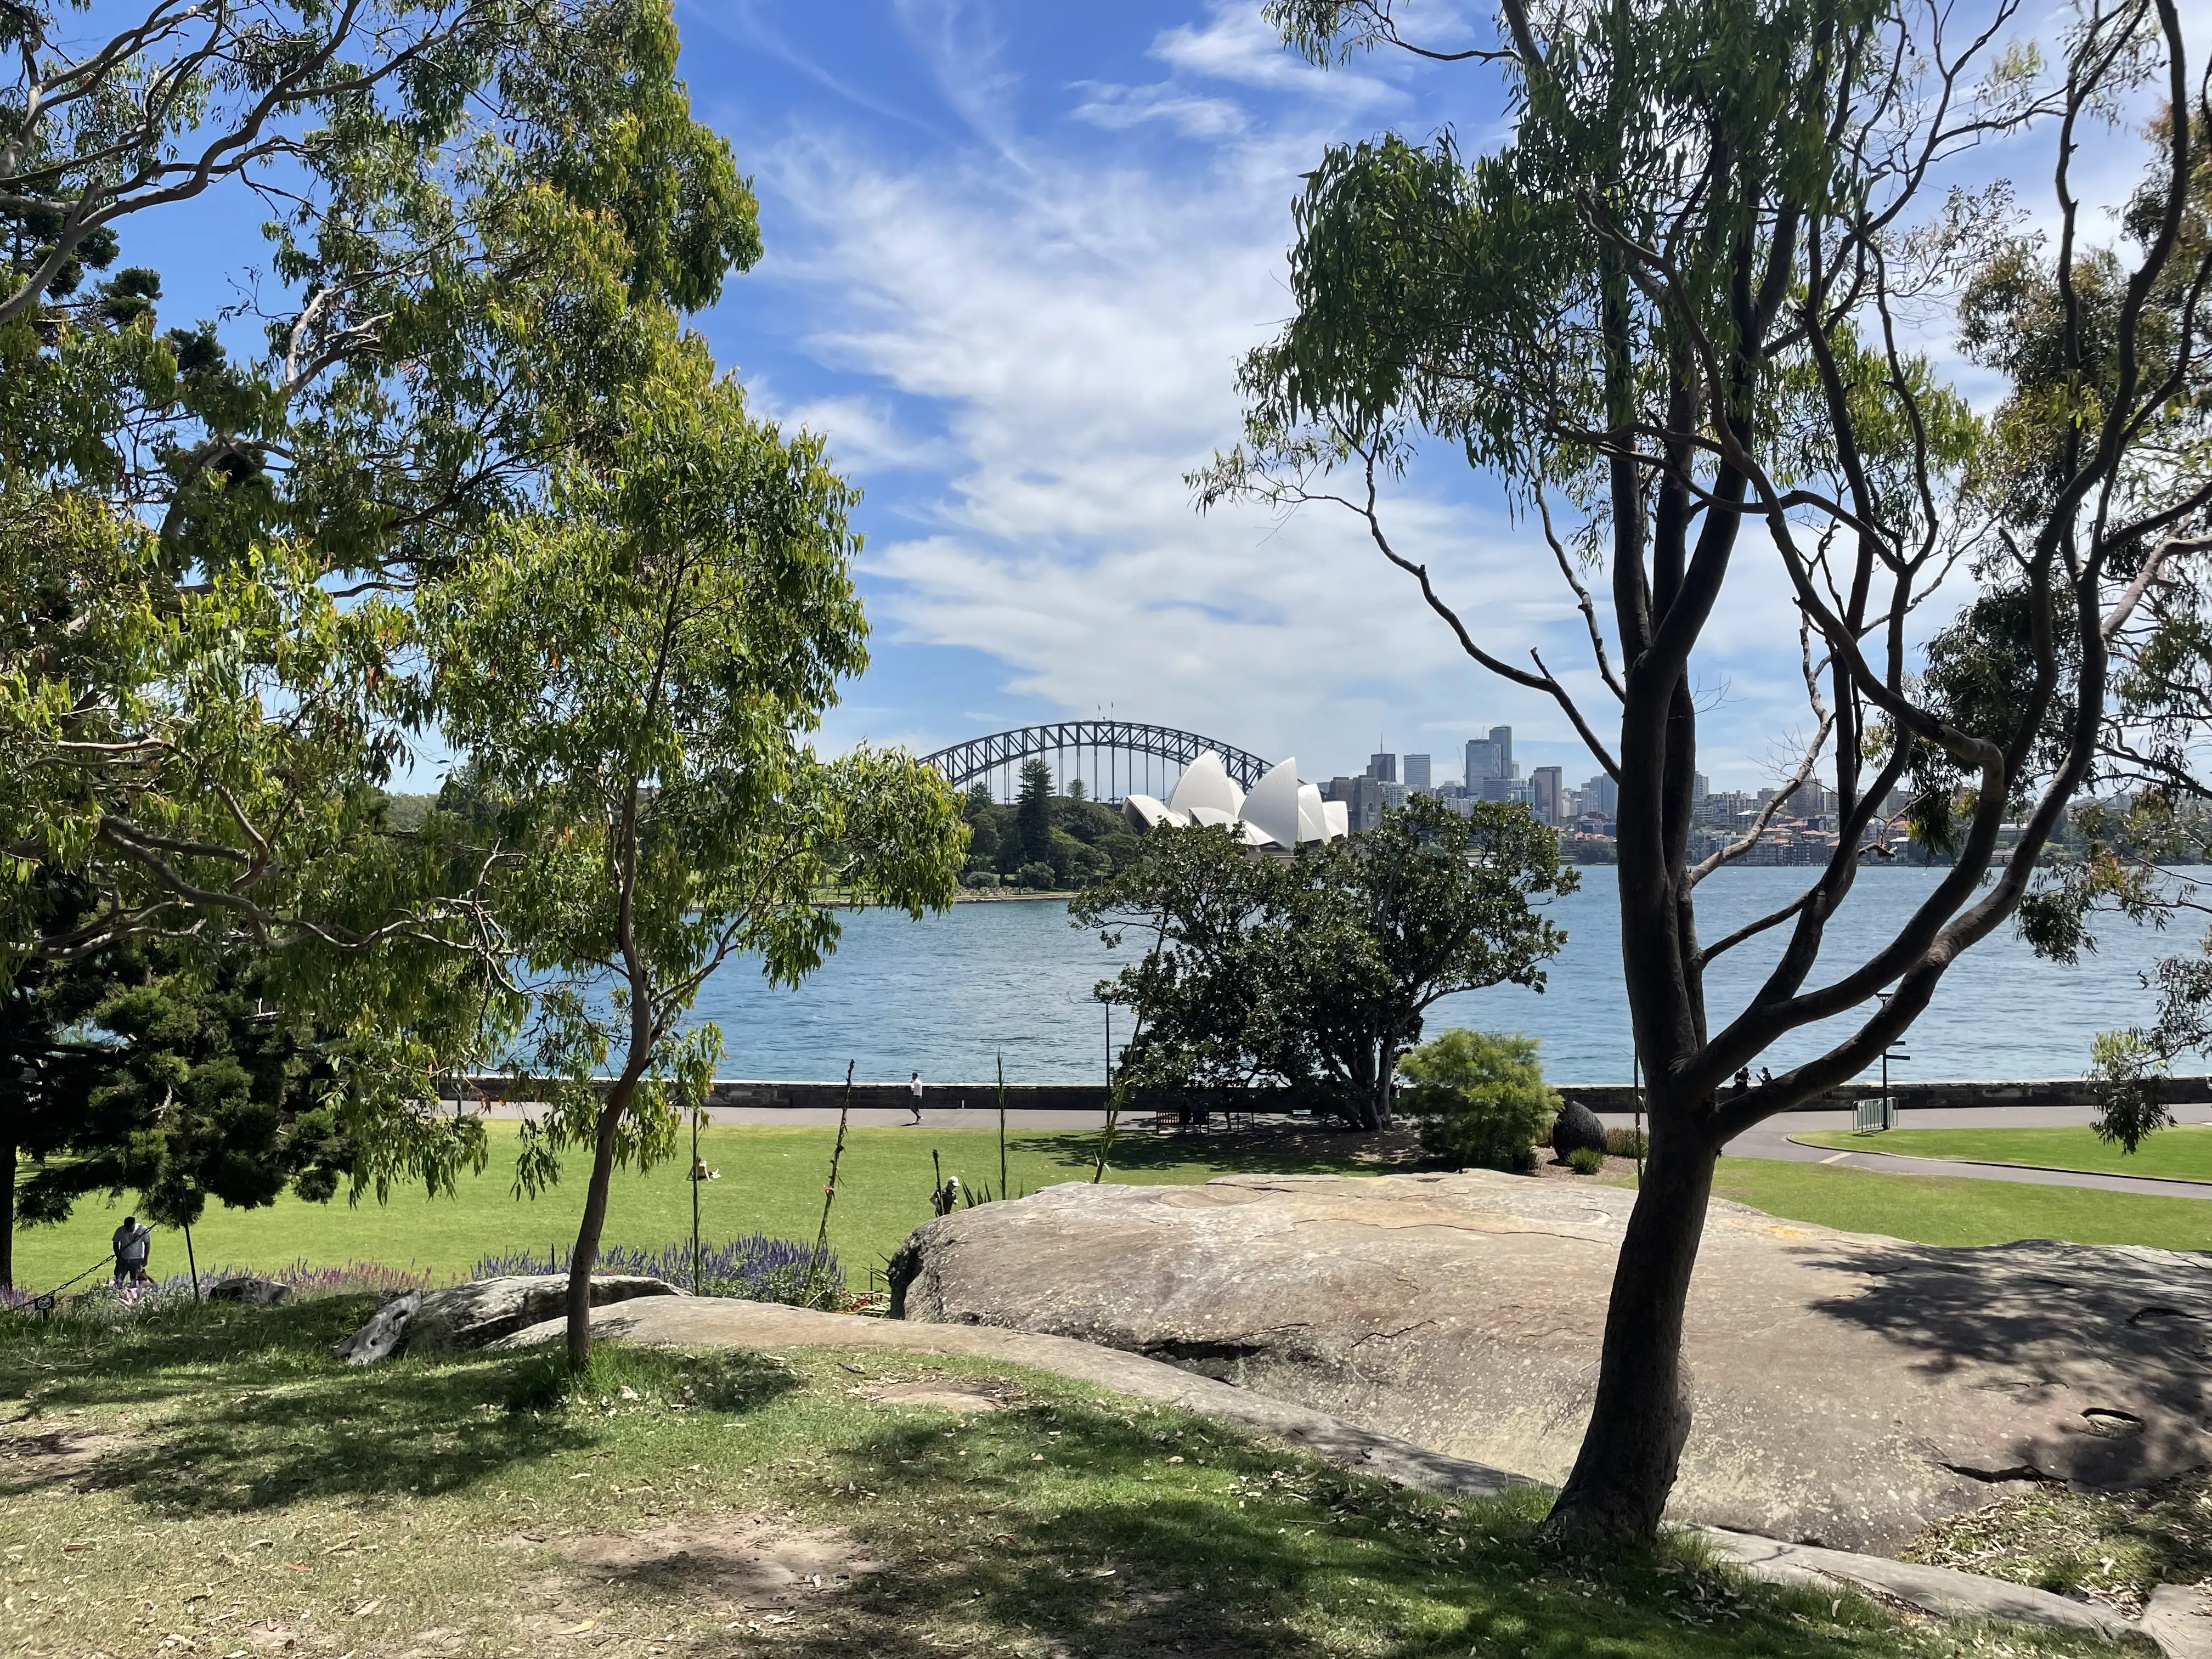 Harbour View Lawn in Sydney, a green calm park with view of the Ocean, Opera House and Harbour Bridge